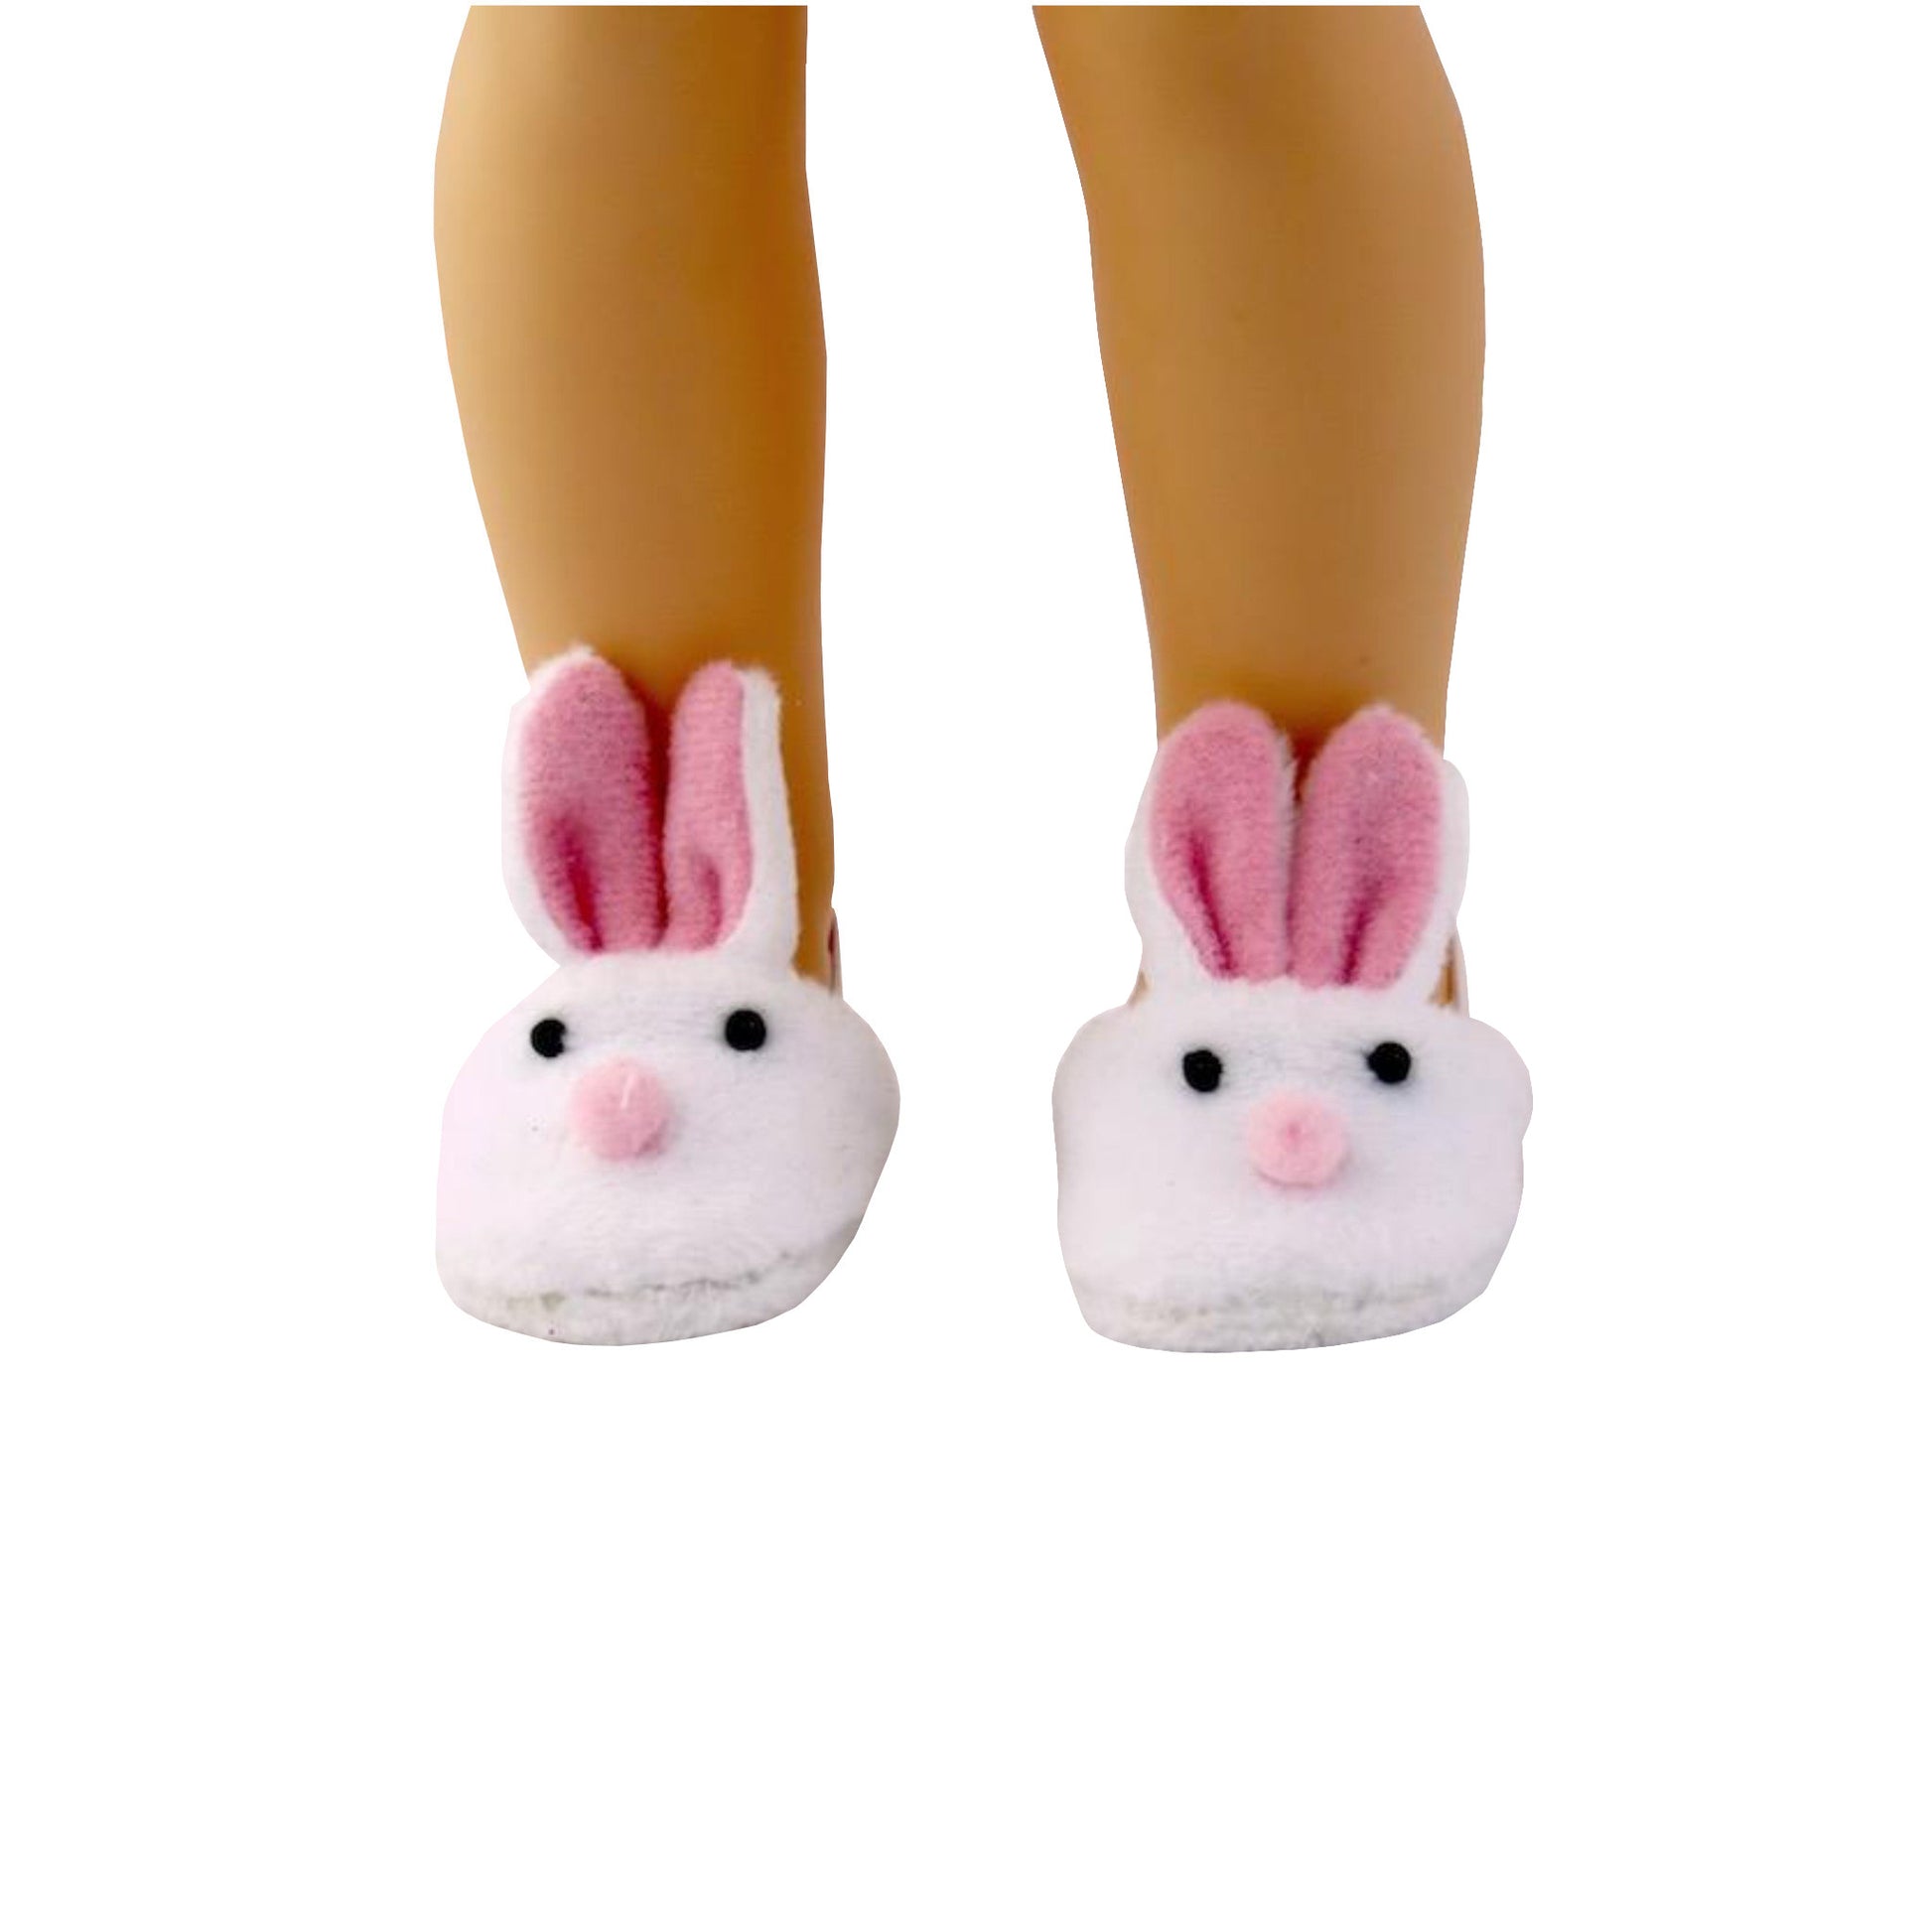 Bunny Slippers for 14 1/2-inch Dolls View 2